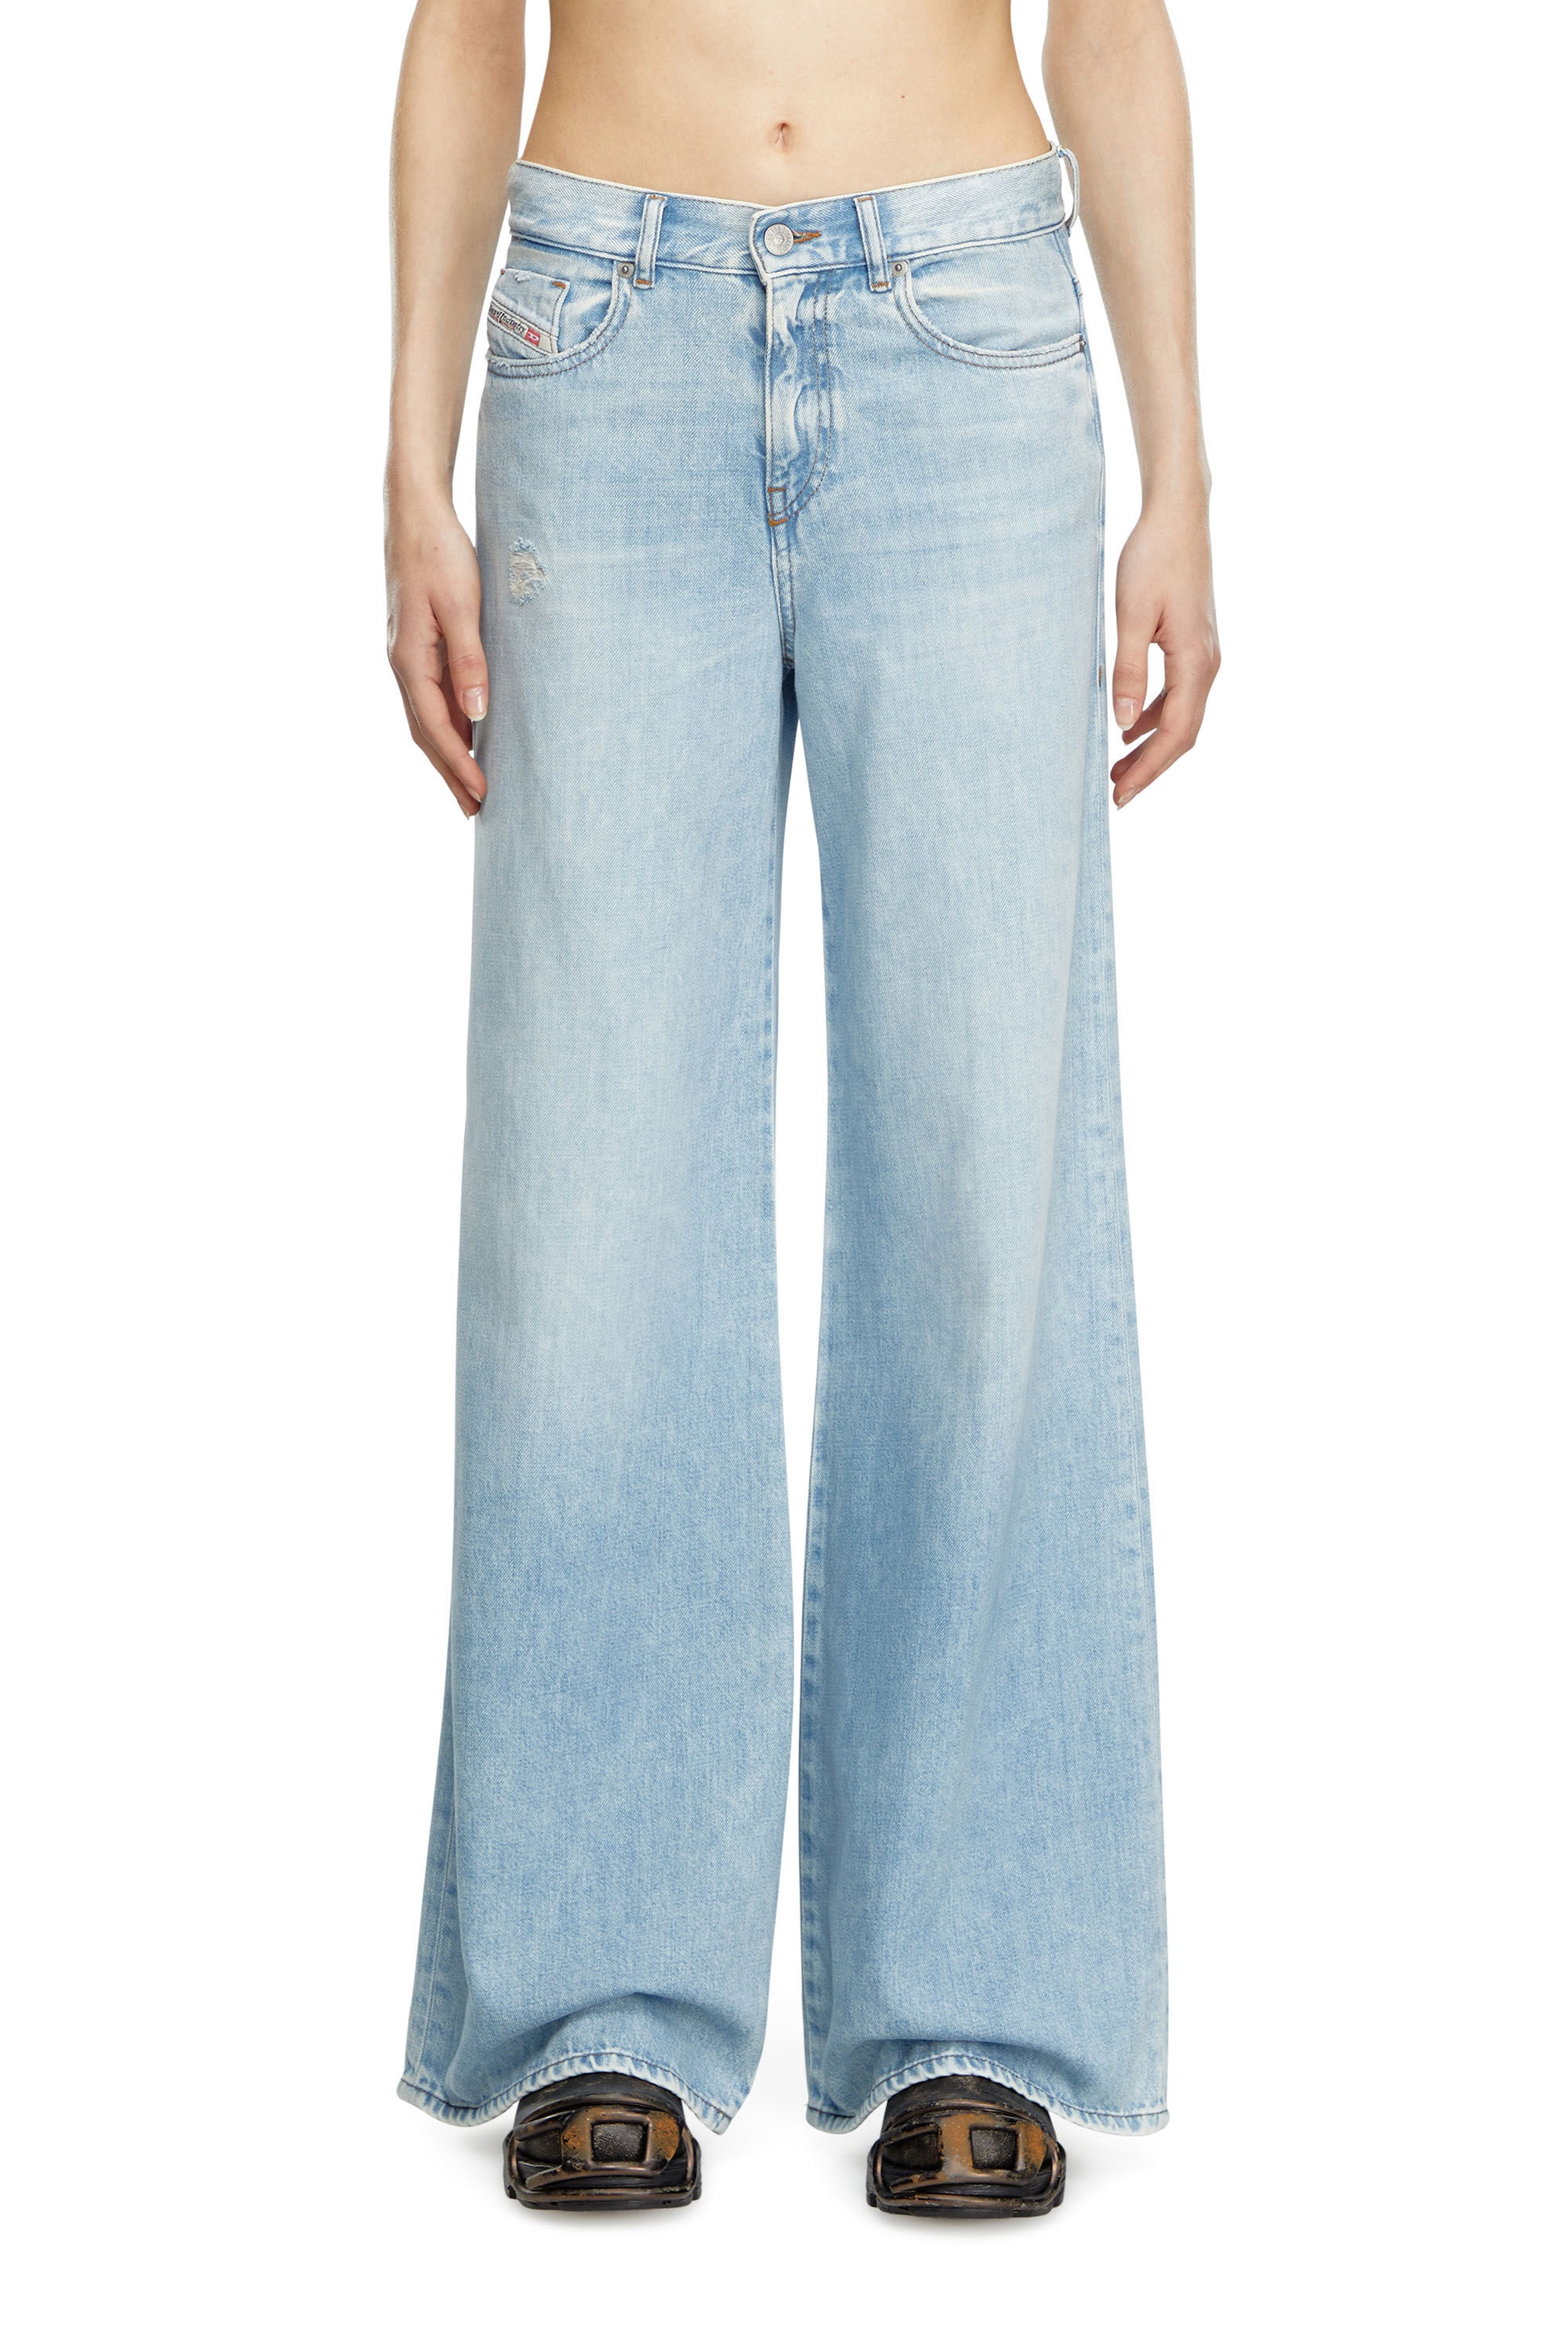 BOOTCUT AND FLARE JEANS 1978 D-AKEMI 068MQ - 3